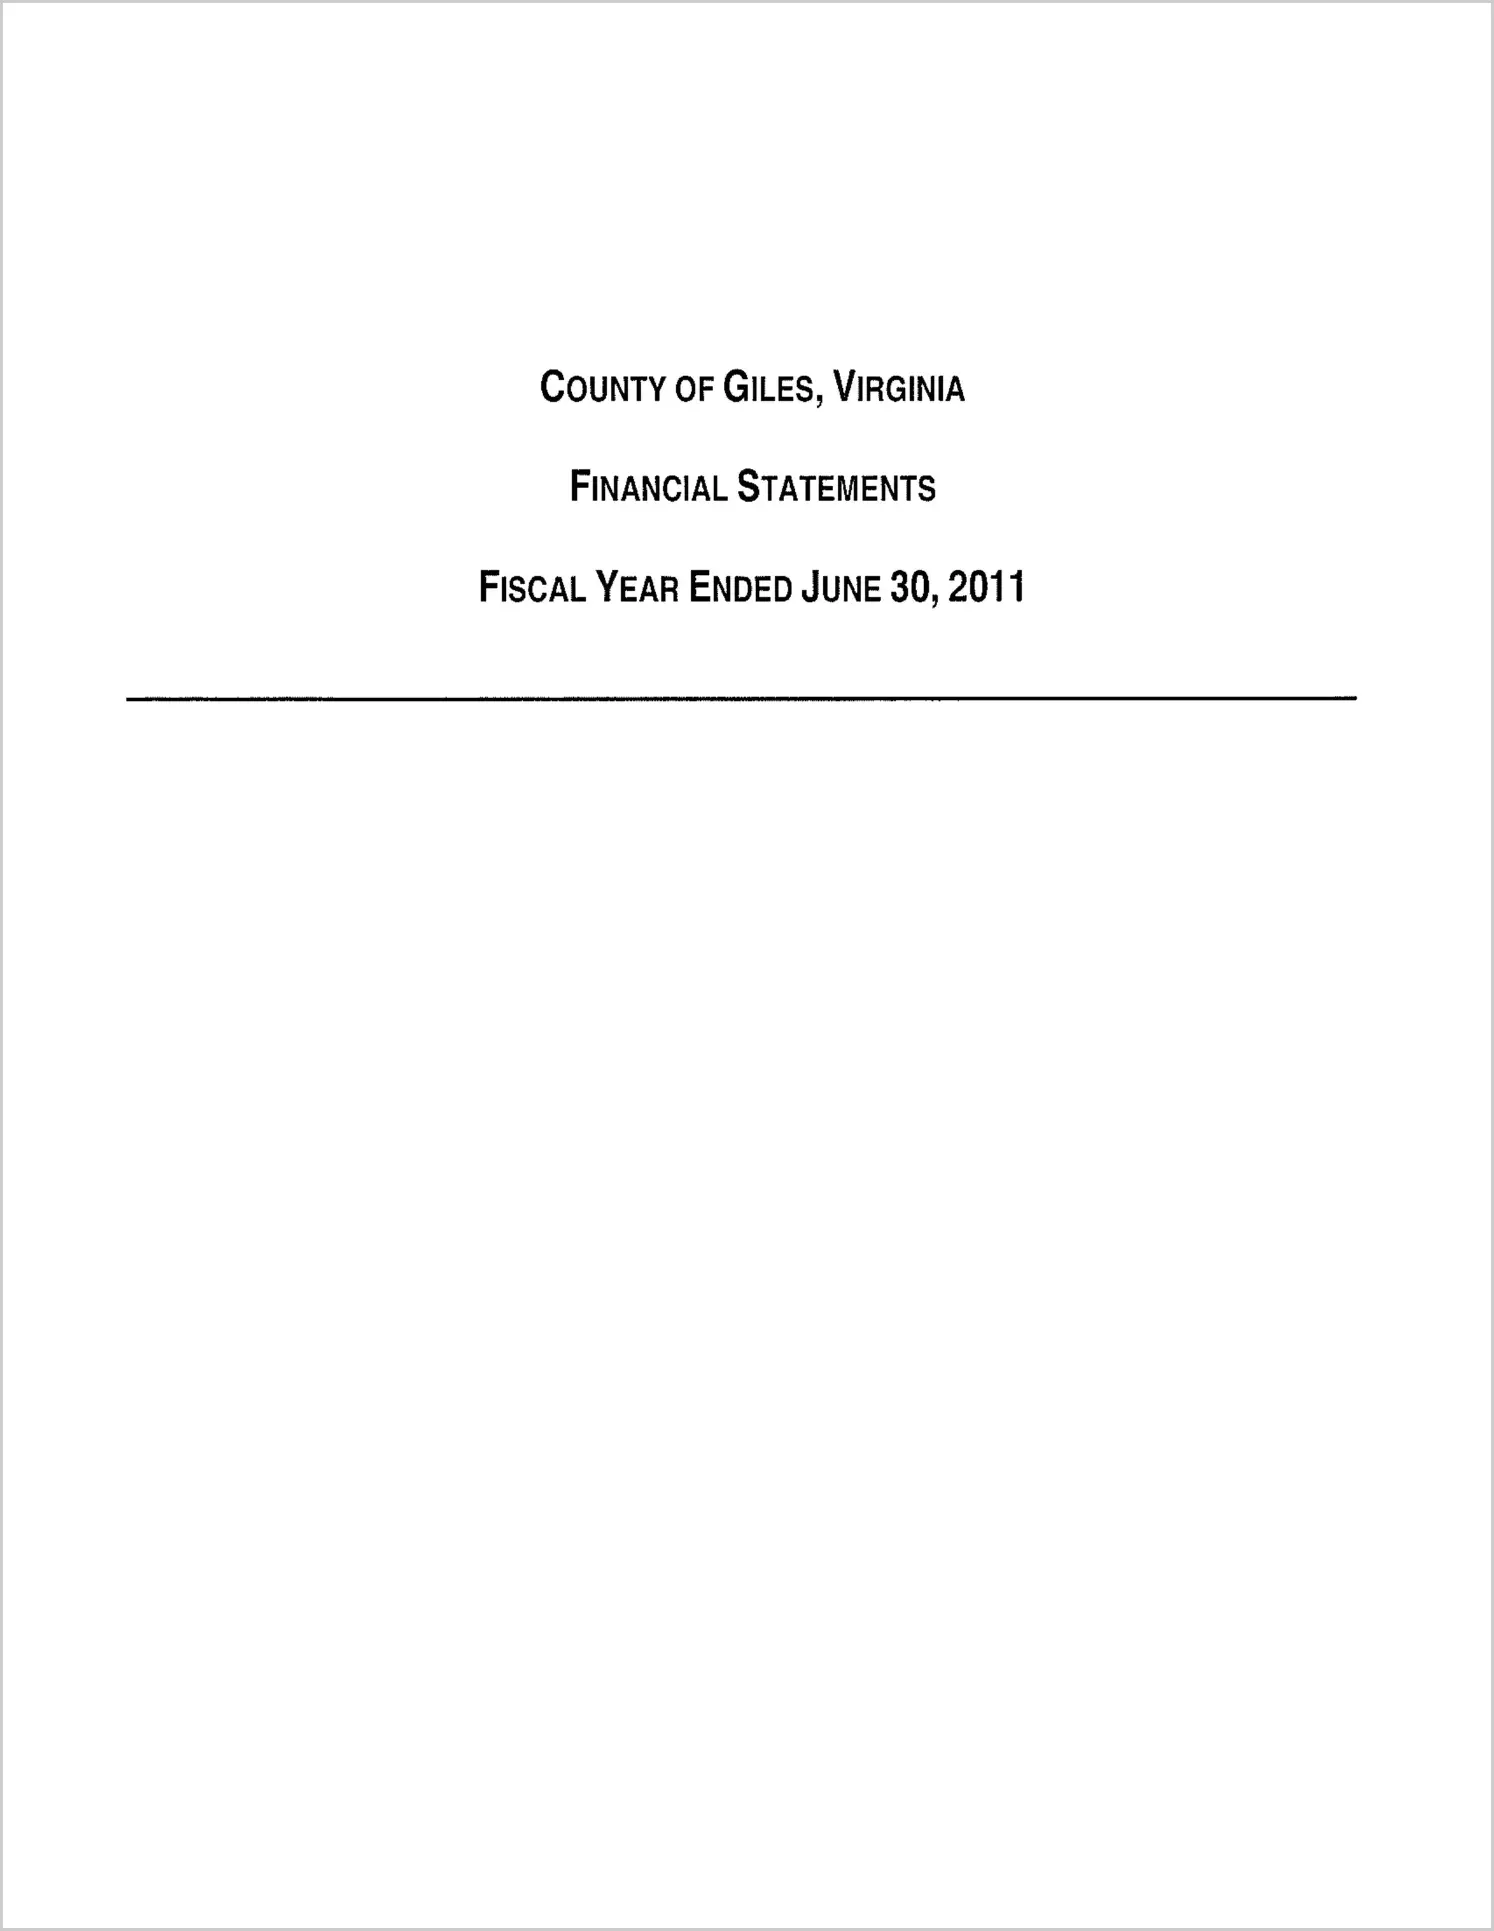 2011 Annual Financial Report for County of Giles